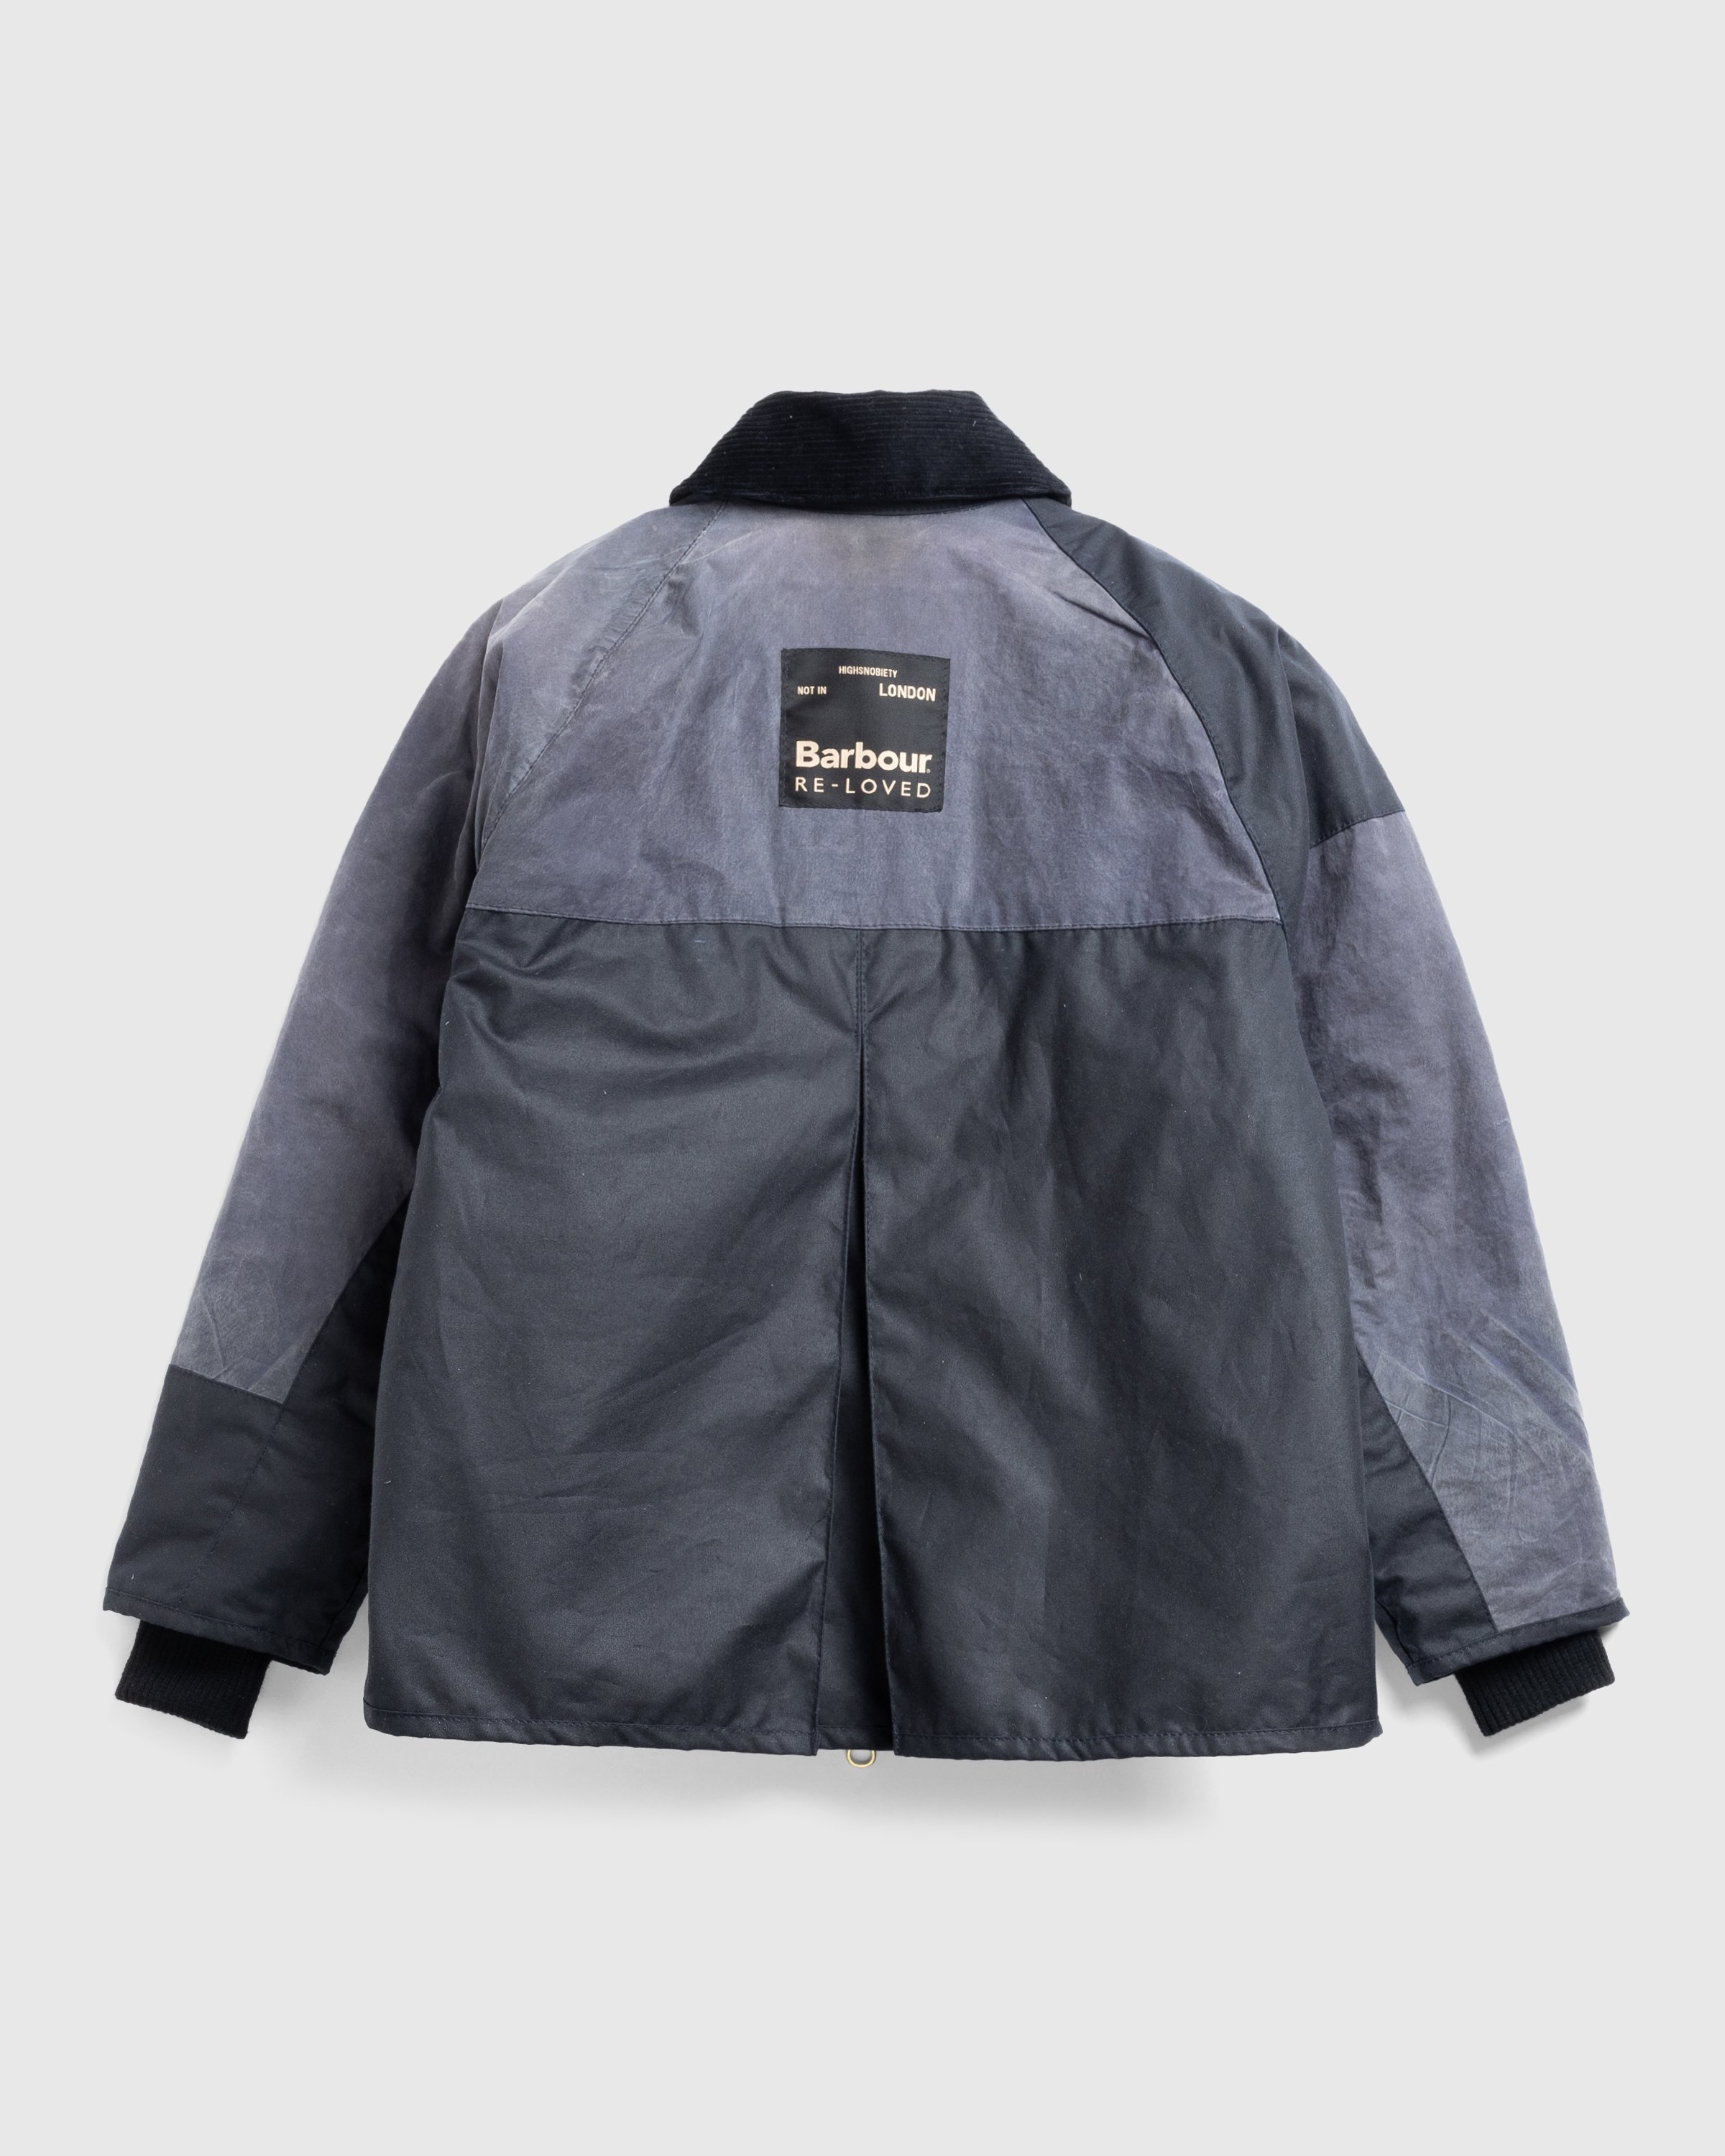 Barbour x Highsnobiety - Re-Loved Cropped Bedale Jacket 1 - 36 - Grey-Black - Clothing - Olive - Image 2